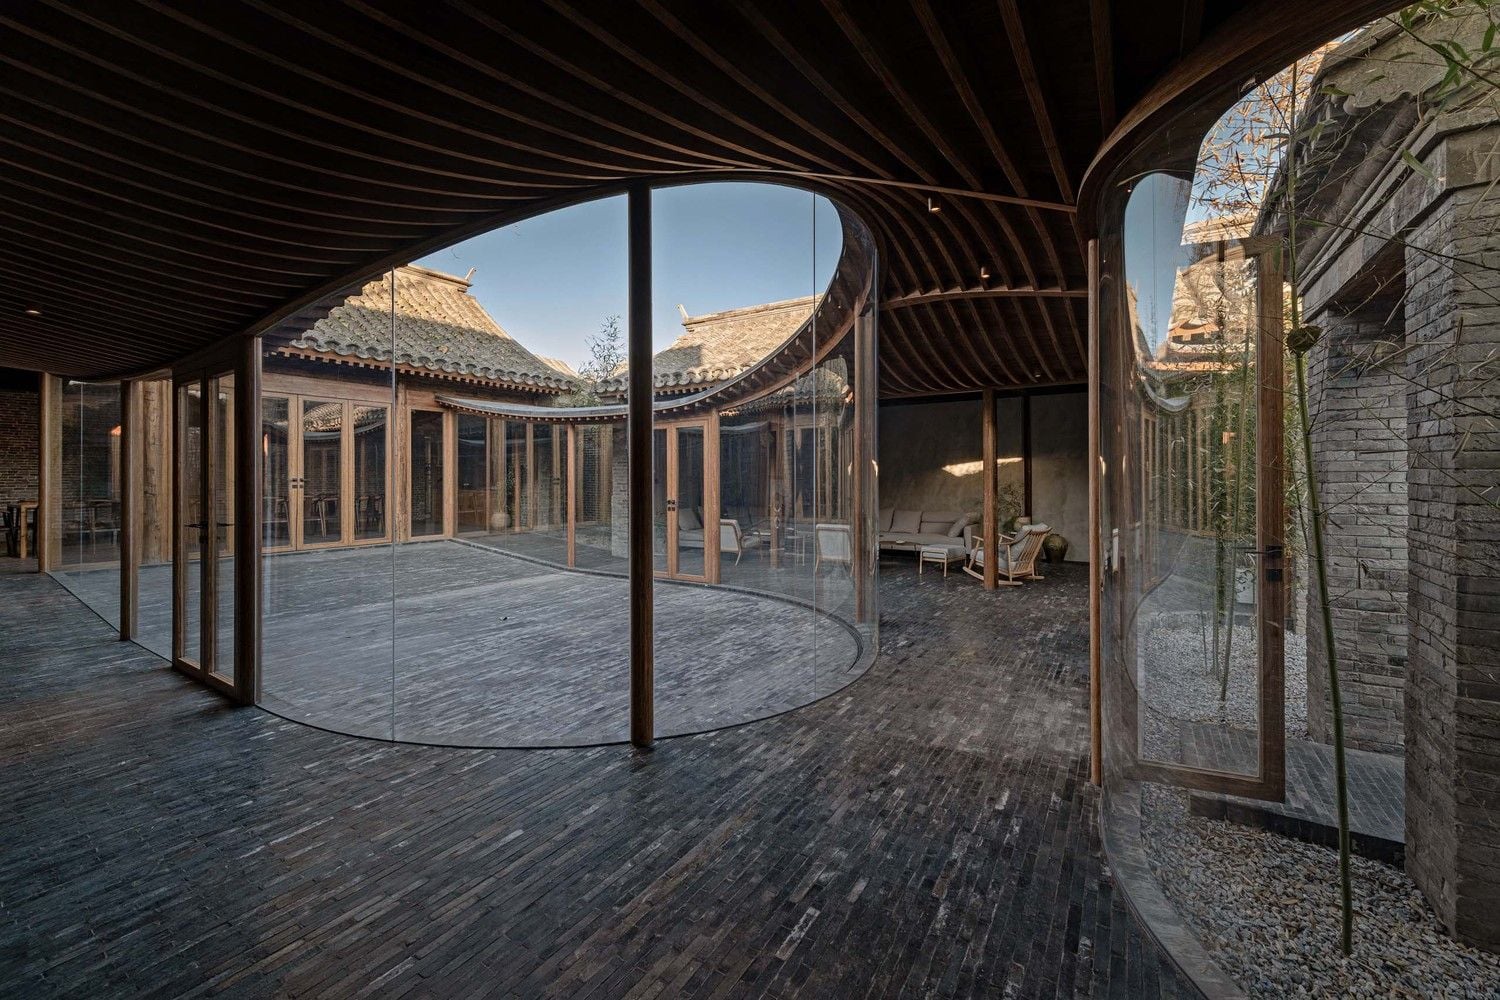 The Qishe Courtyard's billowing glass additions wrap around small 